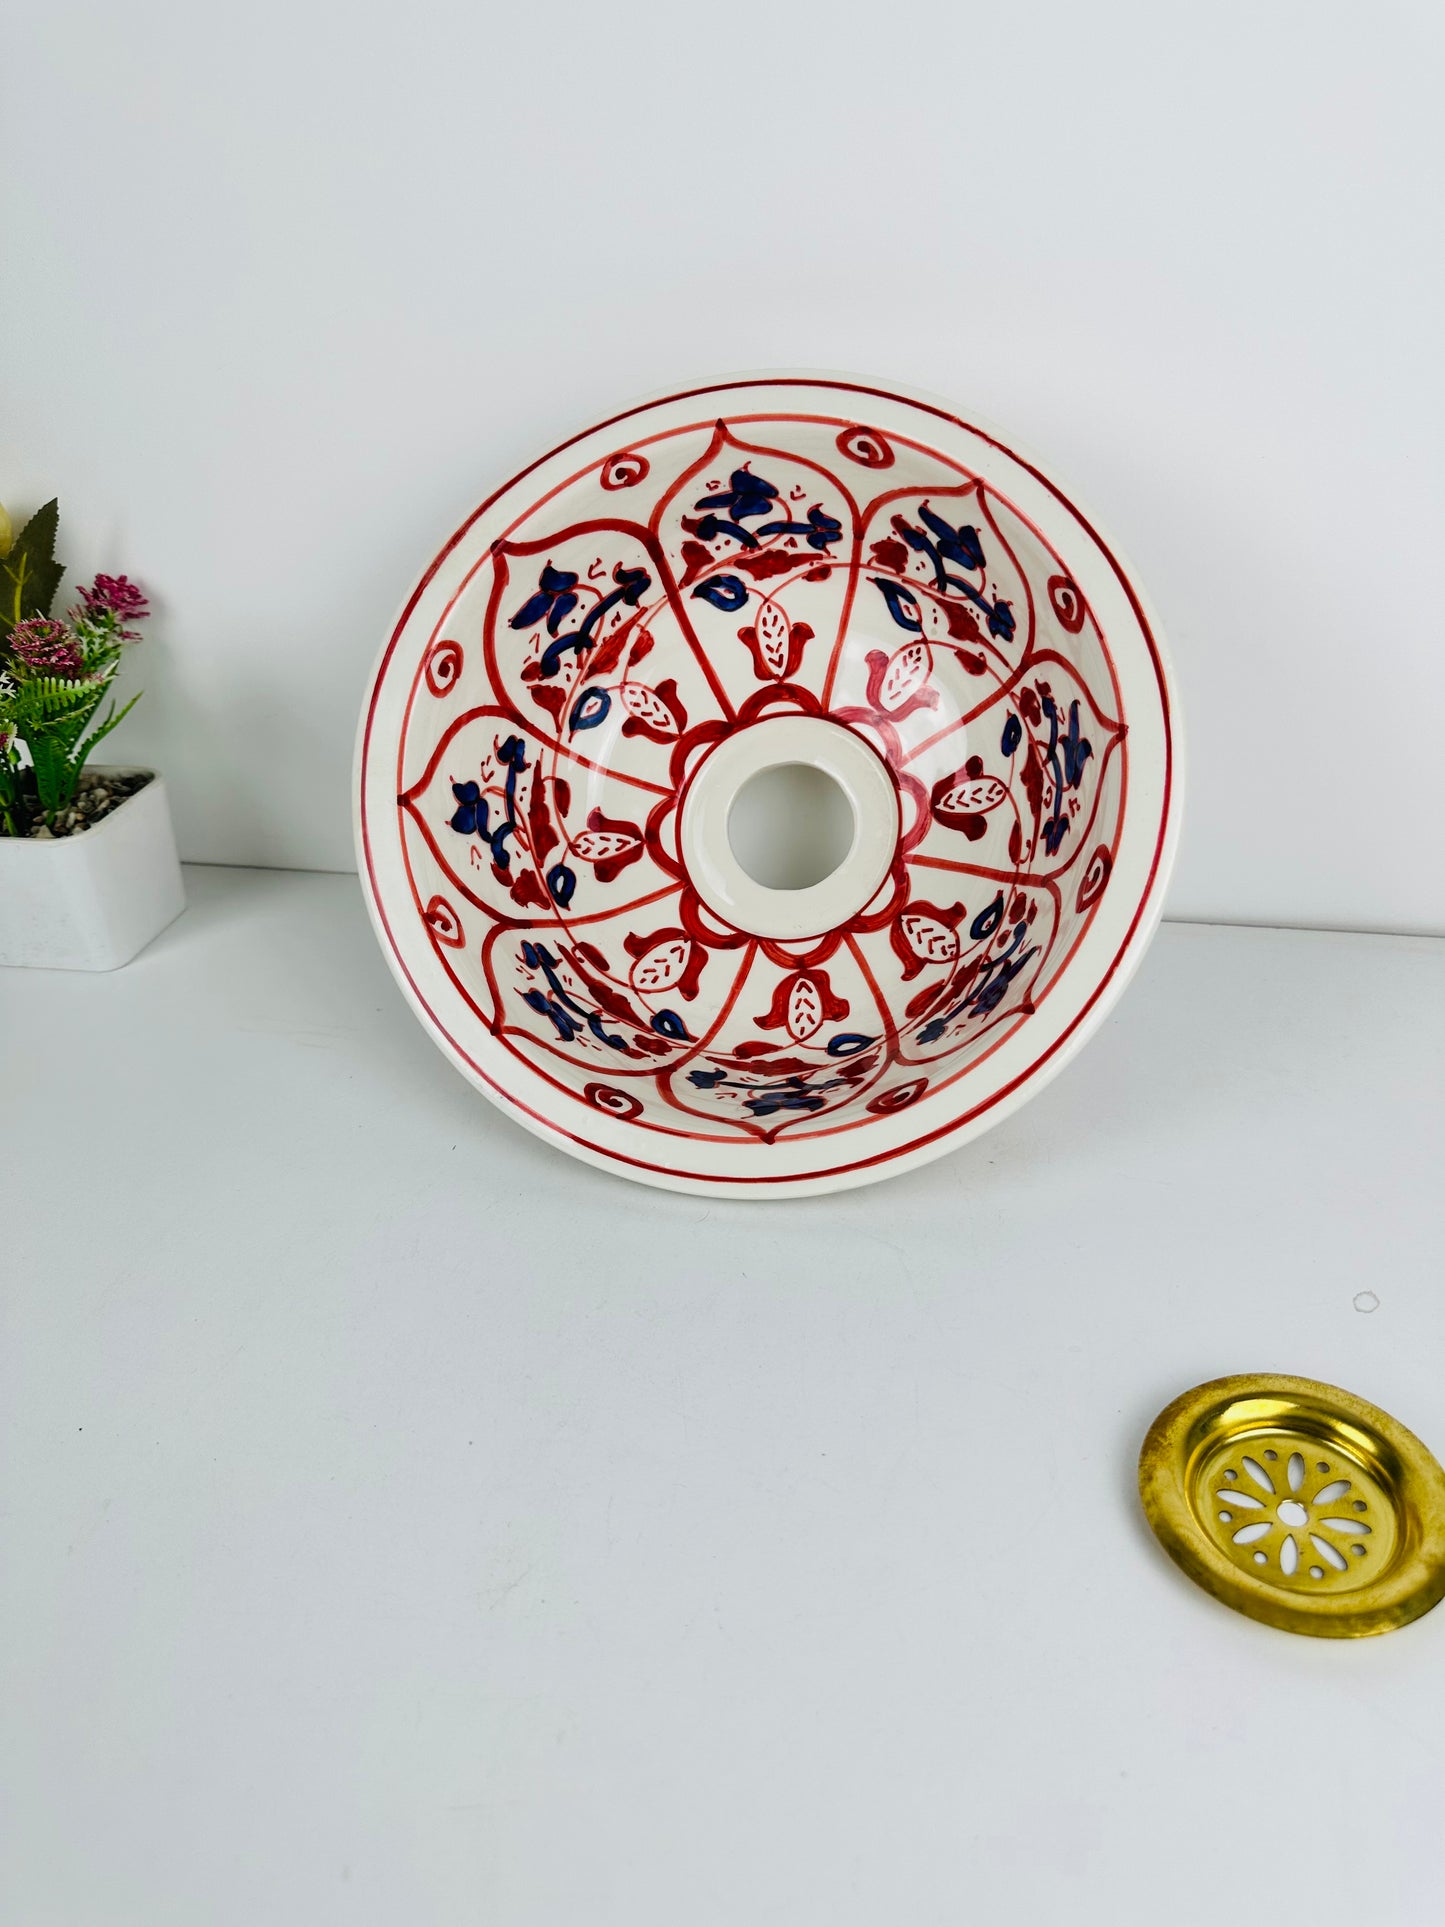 Crimson Blossoms: Handcrafted Ceramic Sink with Red and Blue Accents